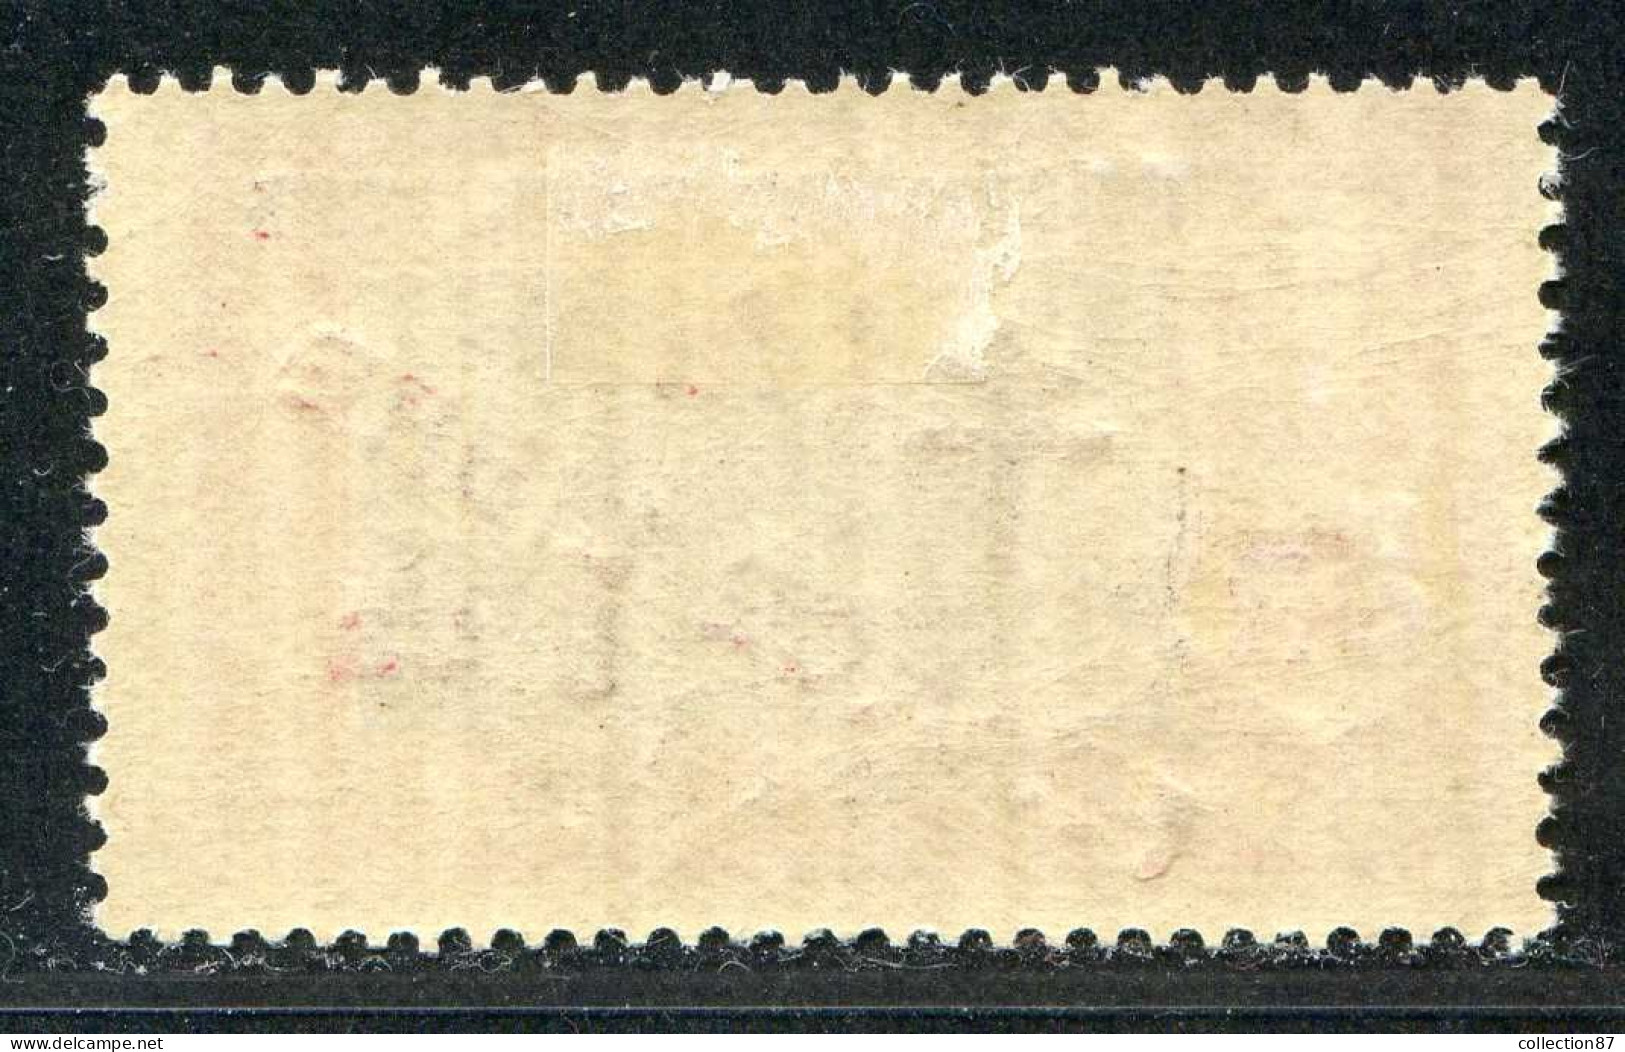 Réf 75 CL2 < -- INDE - FRANCE LIBRE < N° 212 * NEUF Ch.Dos Visible MH * - Neufs